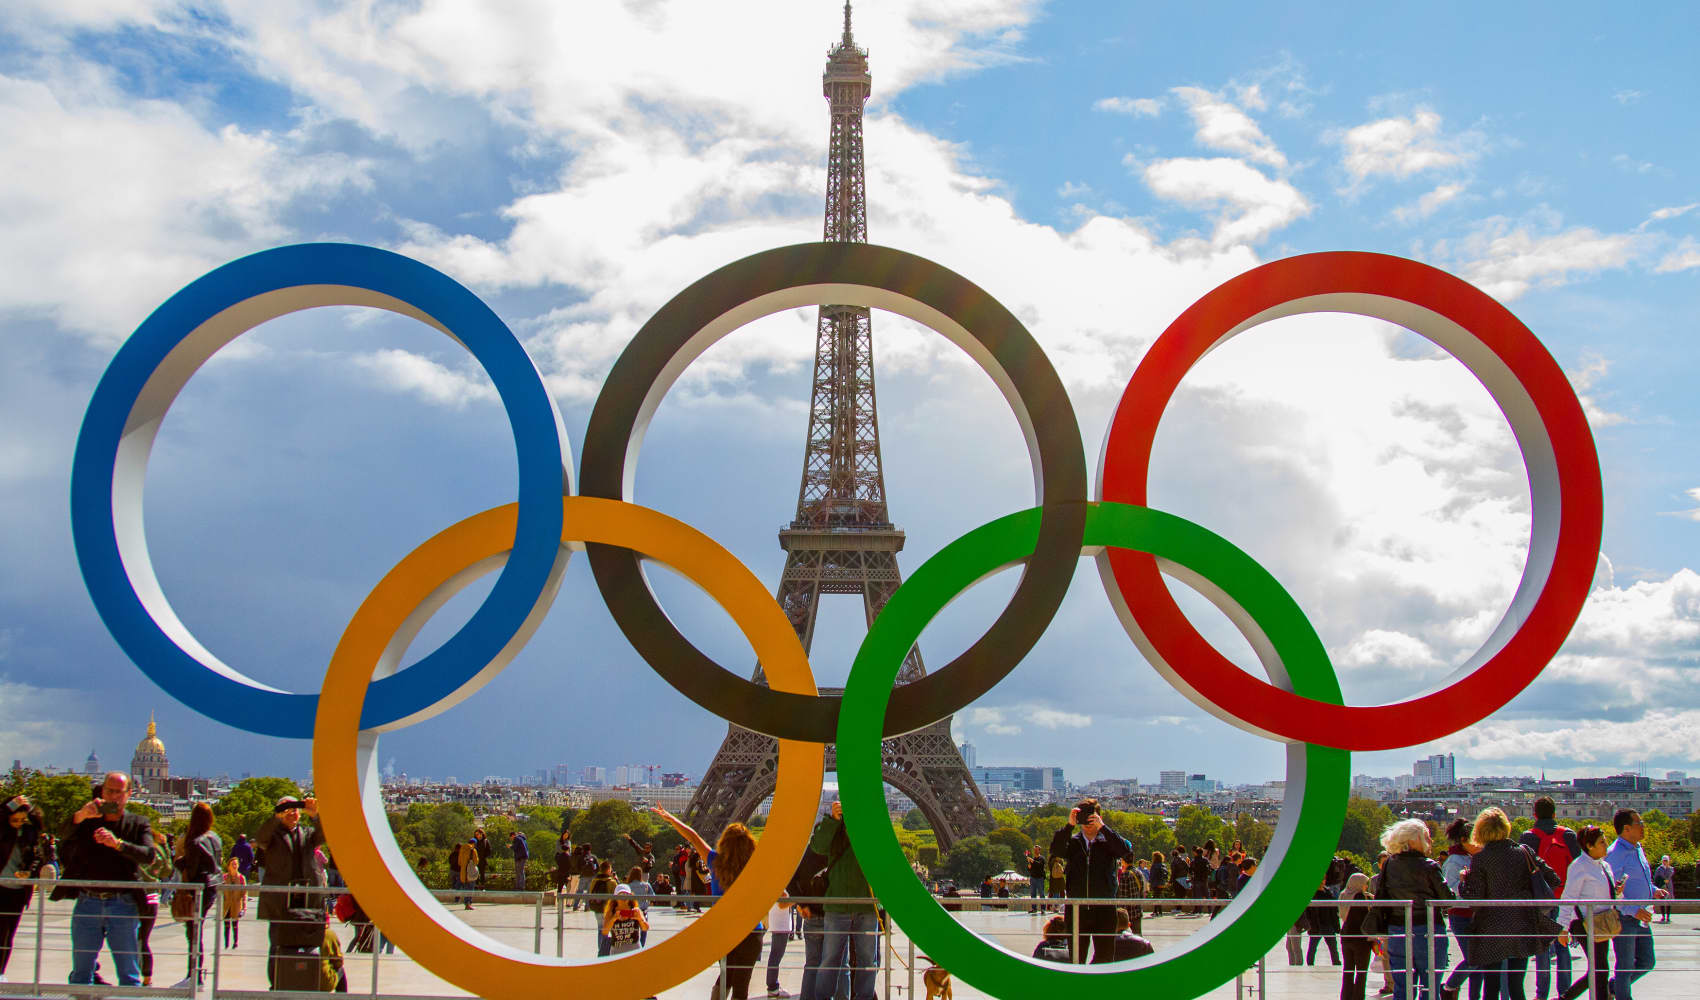 More people than ever expected to bet on Olympics after US legal gambling boom